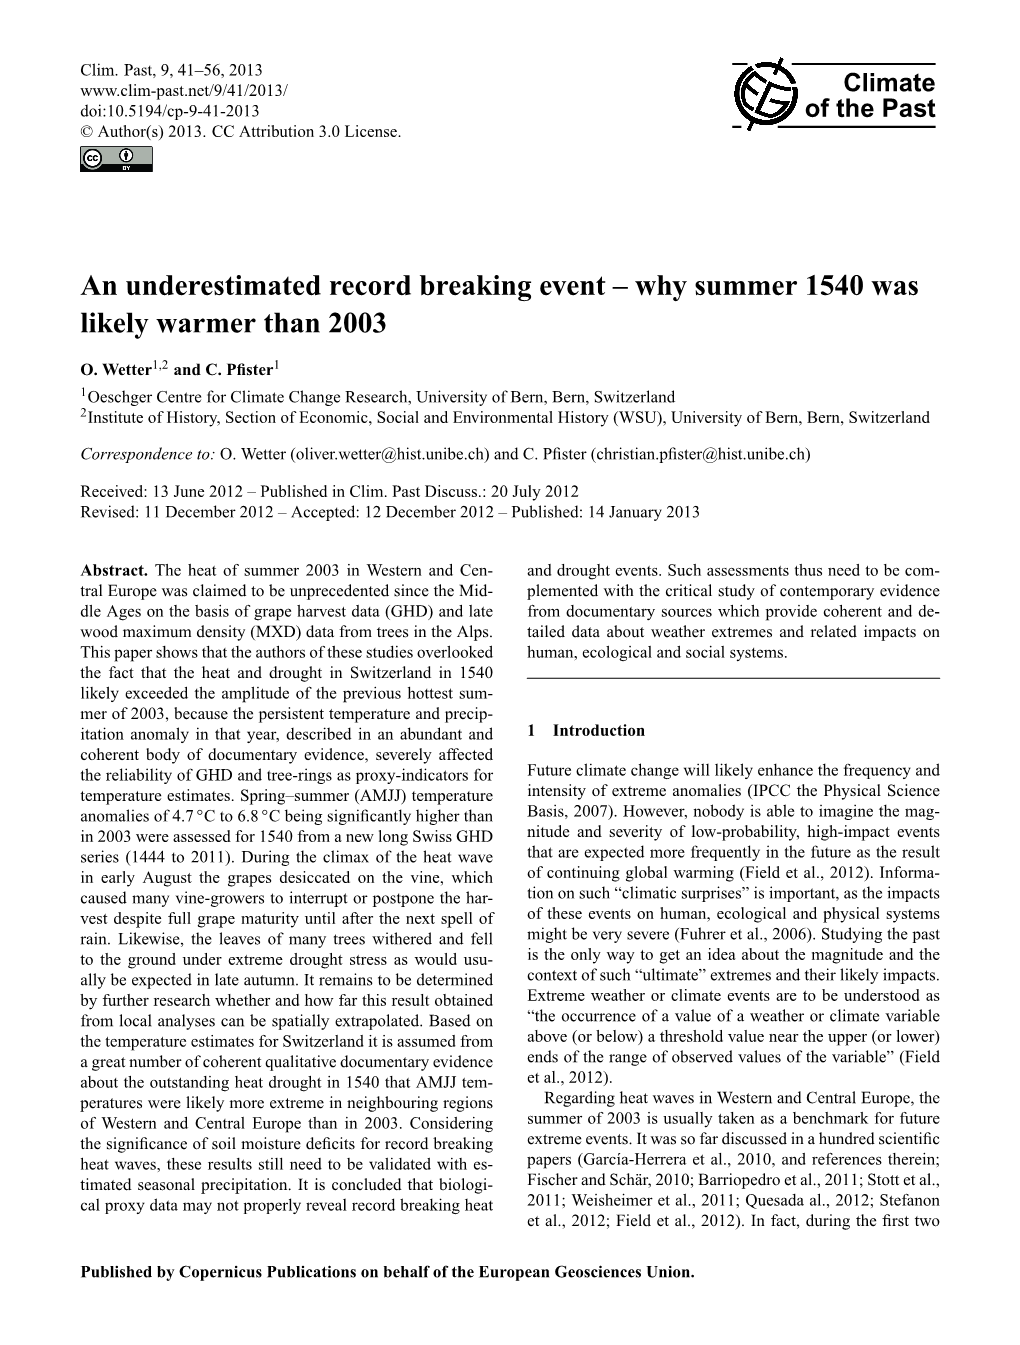 An Underestimated Record Breaking Event – Why Summer 1540 Was Likely Warmer Than 2003